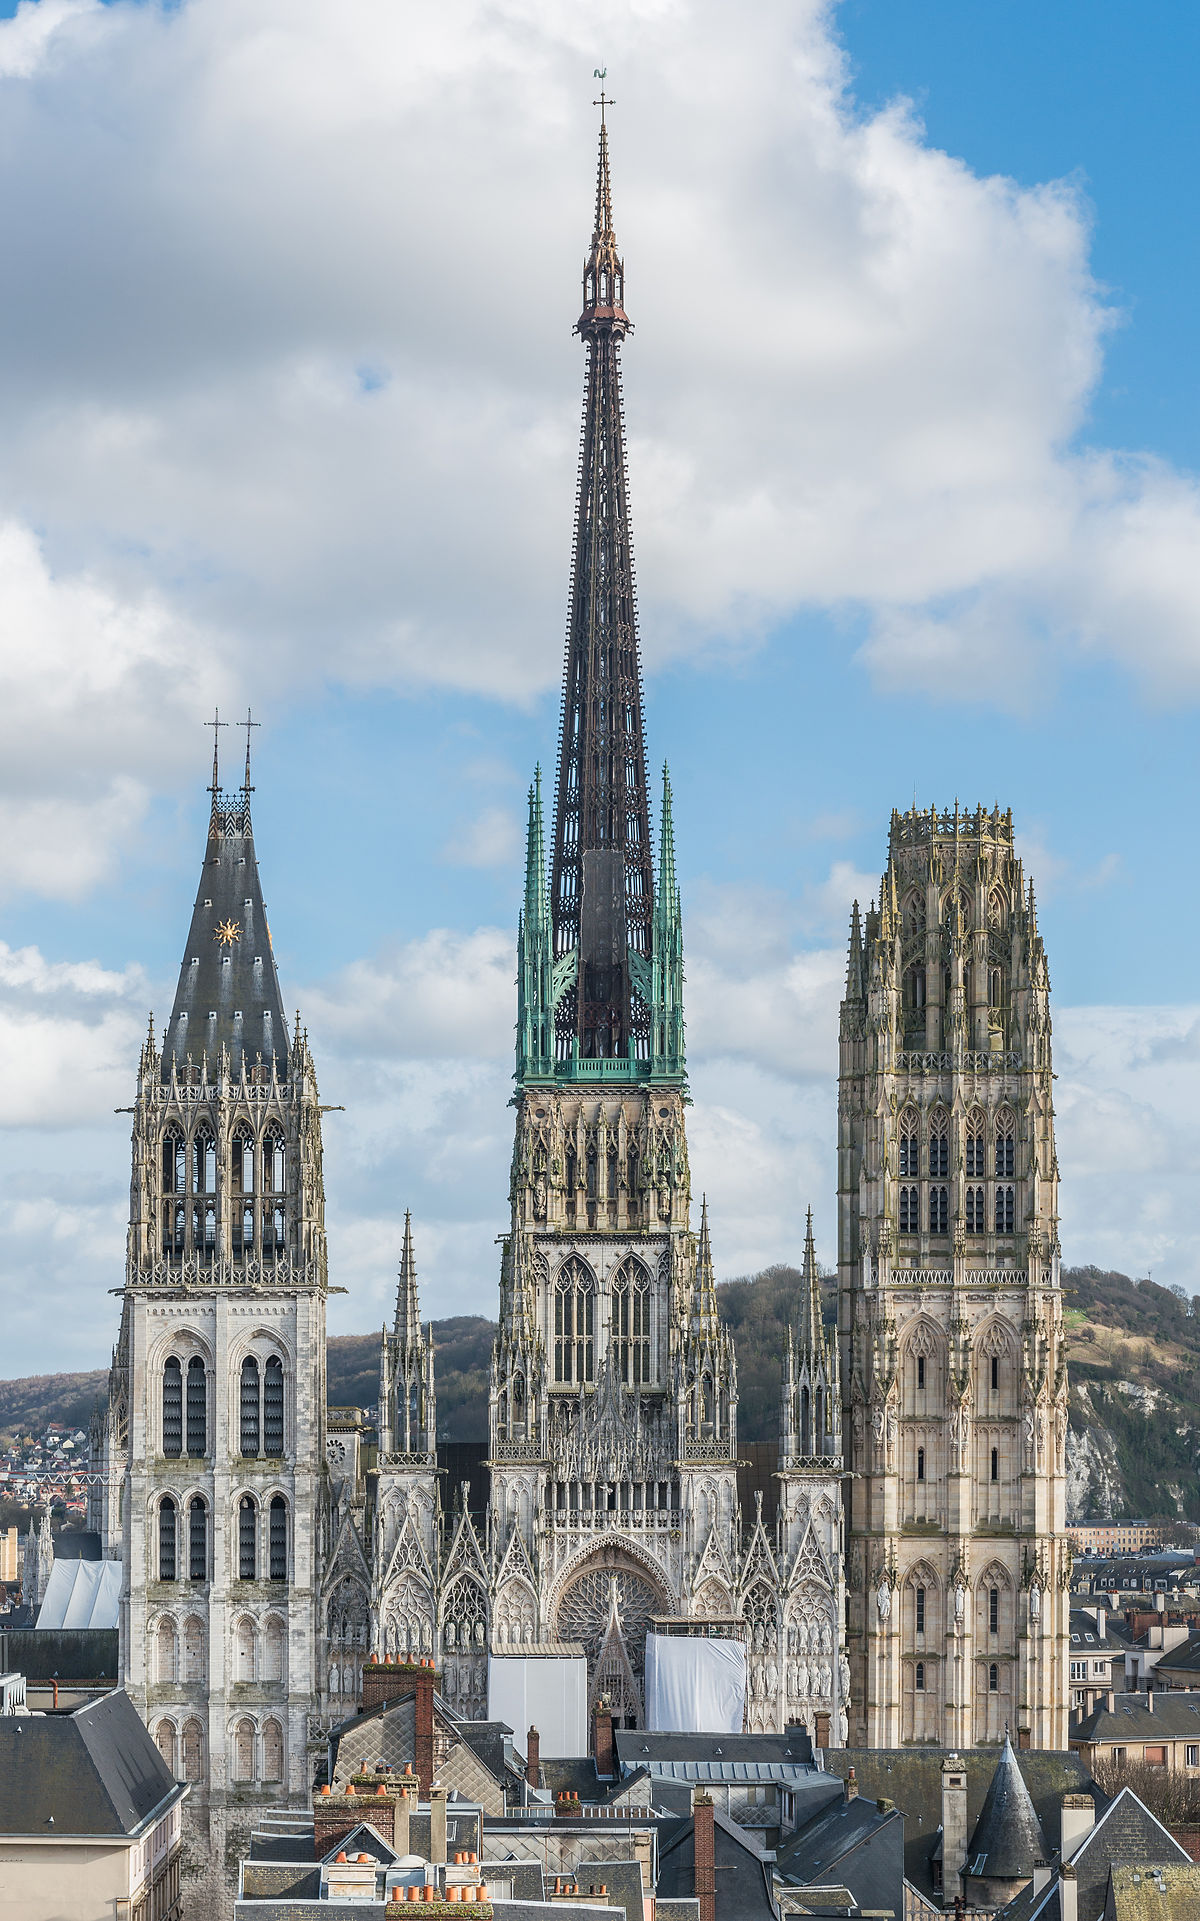 Rouen Cathedral - Wikipedia